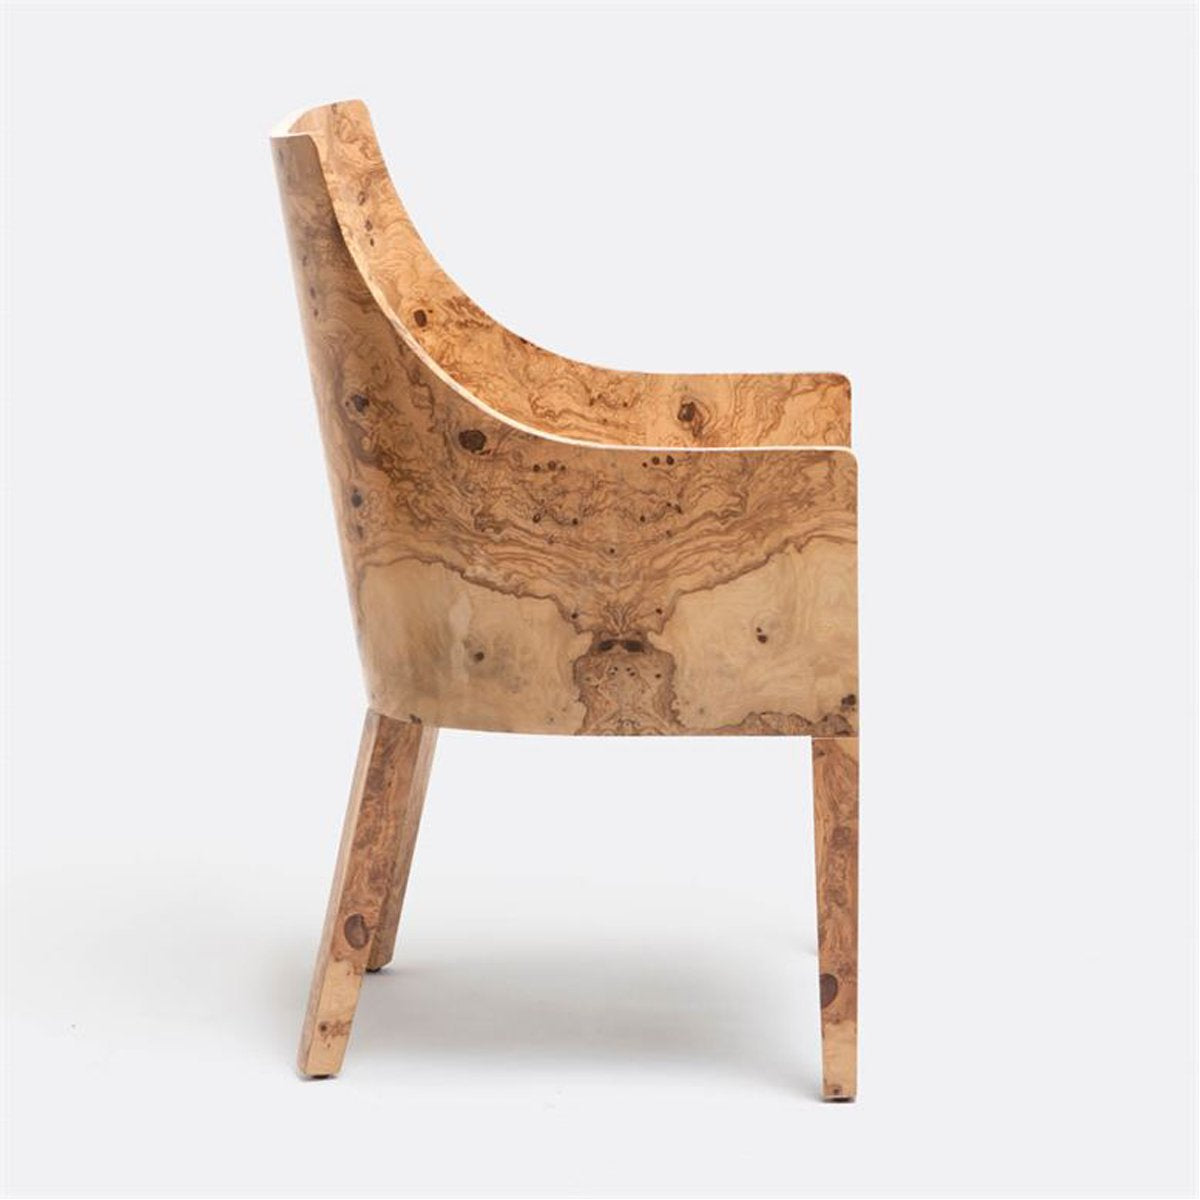 Made Goods Everett Olive Ash Arm Chair in Bassac Shagreen Leather